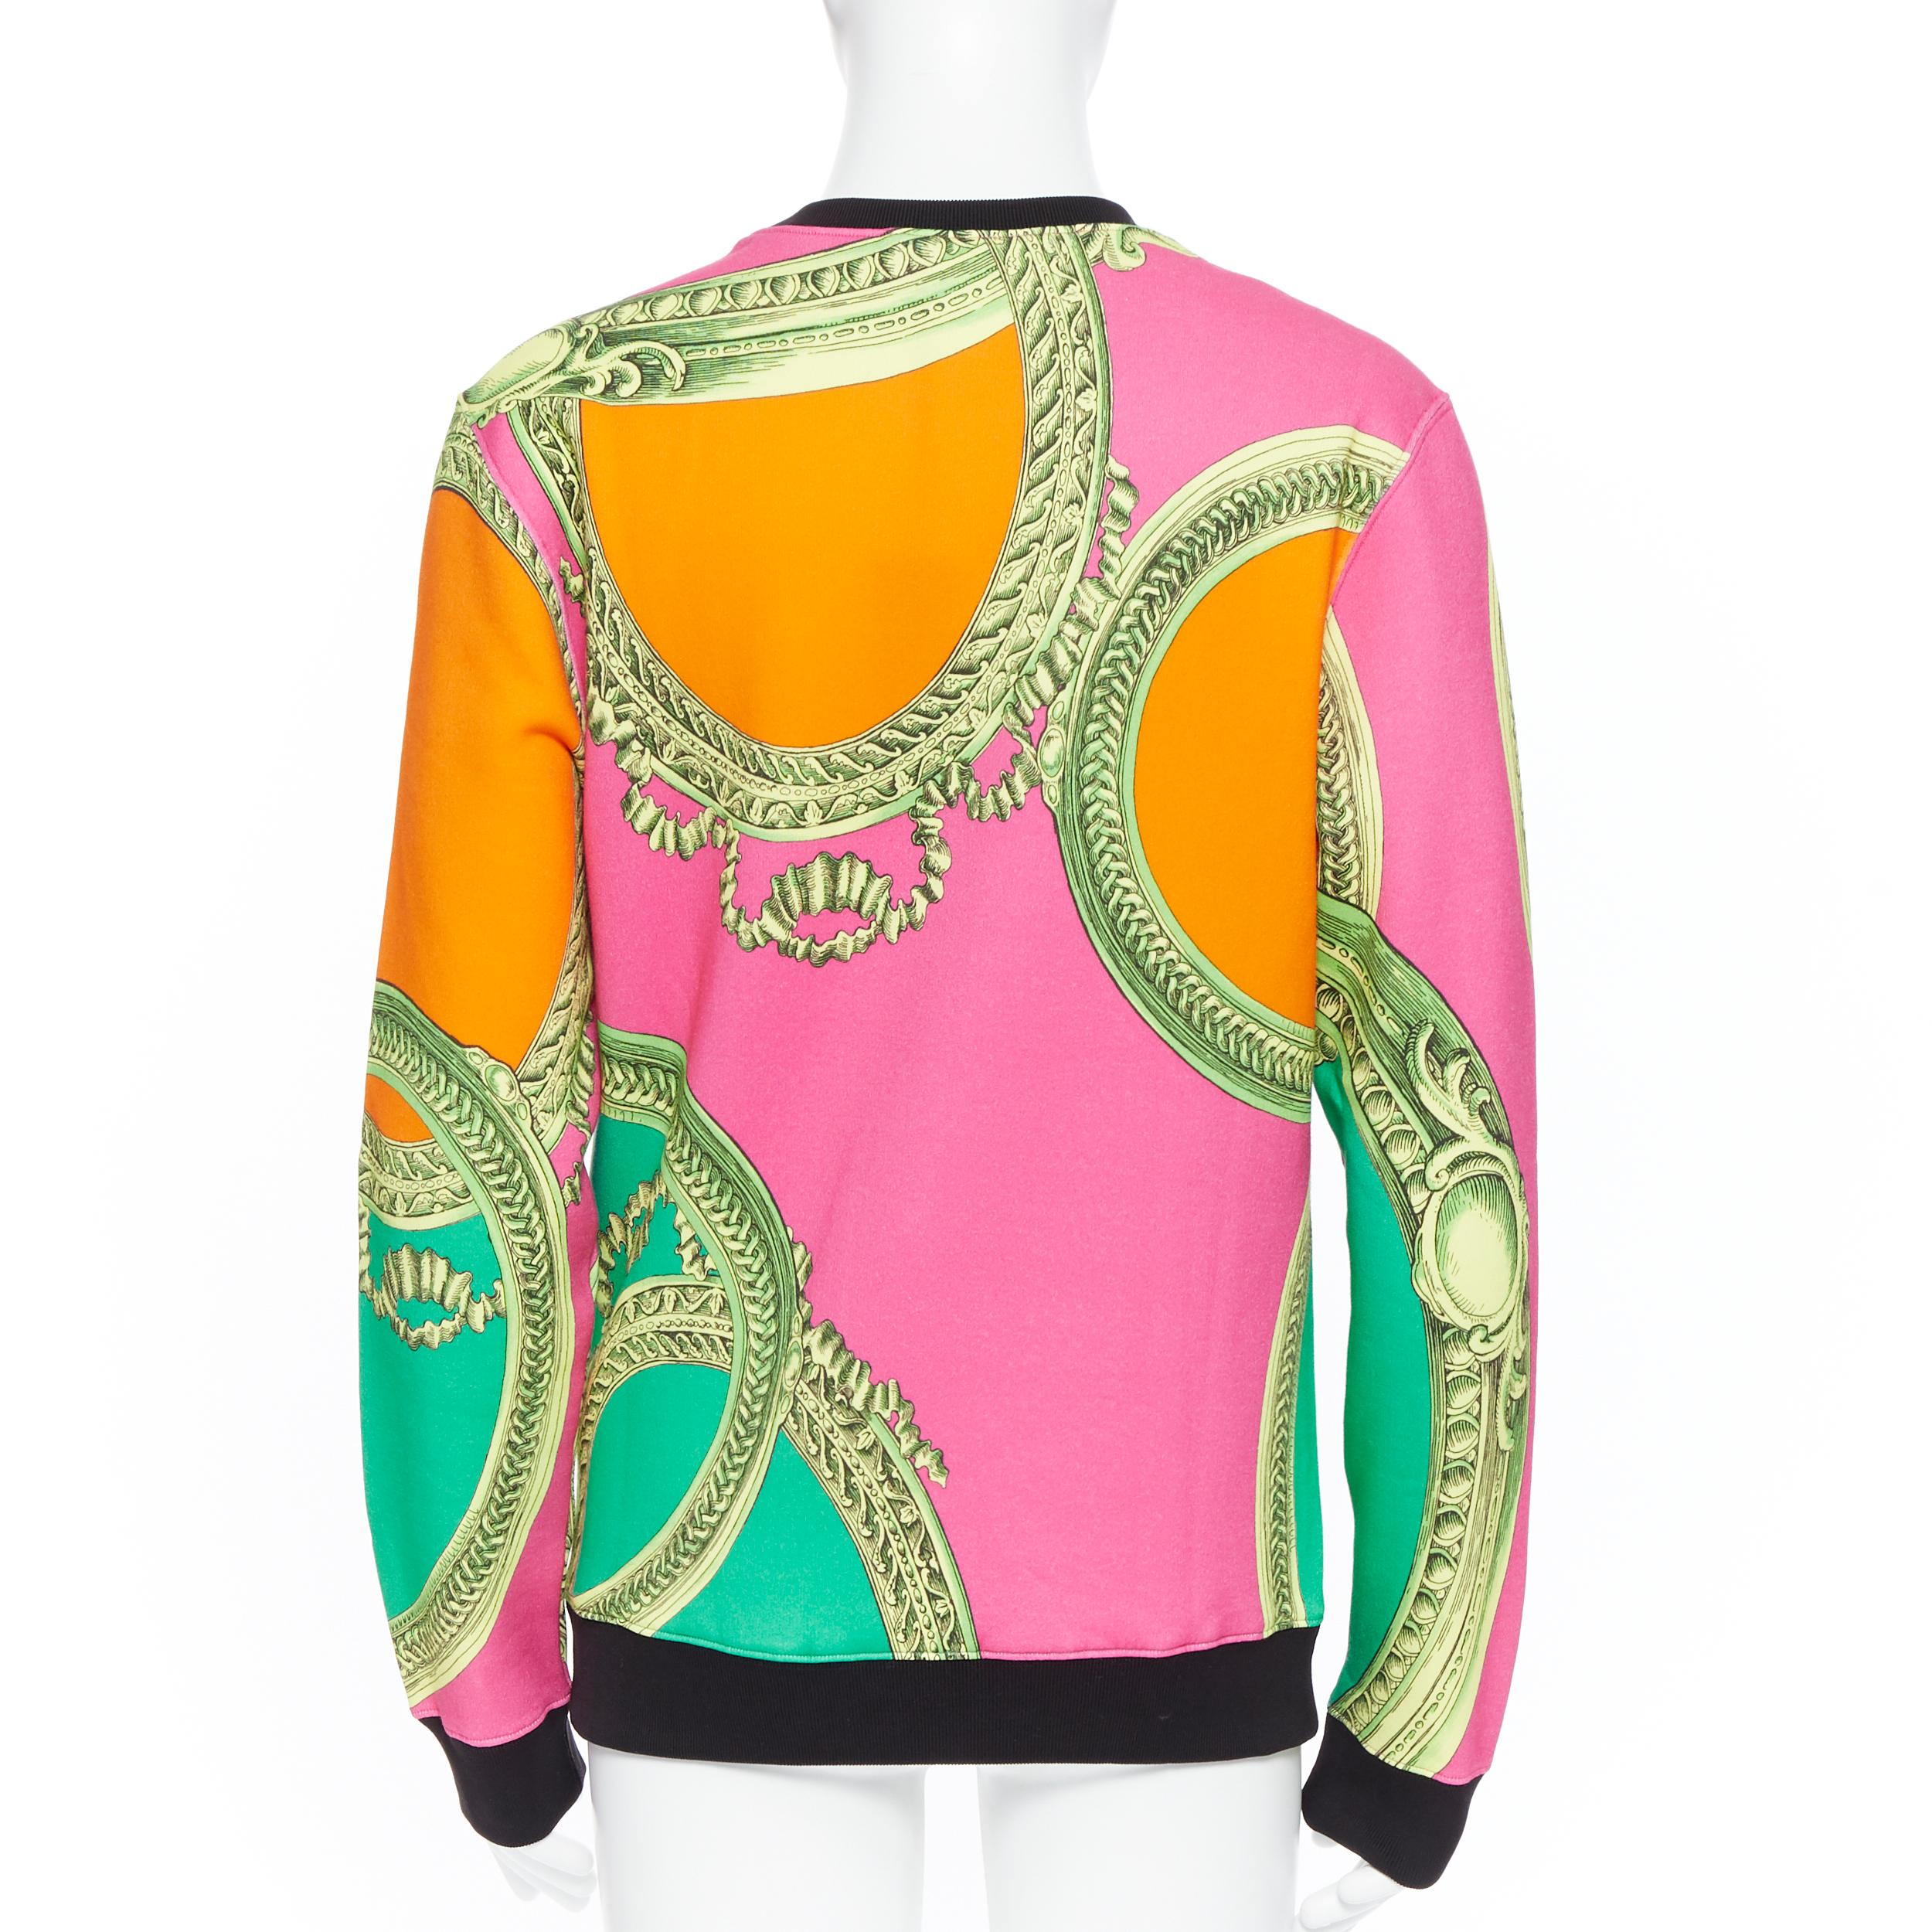 new VERSACE neon pink green cupid logo gold barocco pullover jumper sweats L
Brand: Versace
Designer: Donatella Versace
Collection: Pre-fall 2018
Model Name / Style: Printed crewneck
Material: Cotton
Color: Multicolour
Pattern: Other, neon Barocco